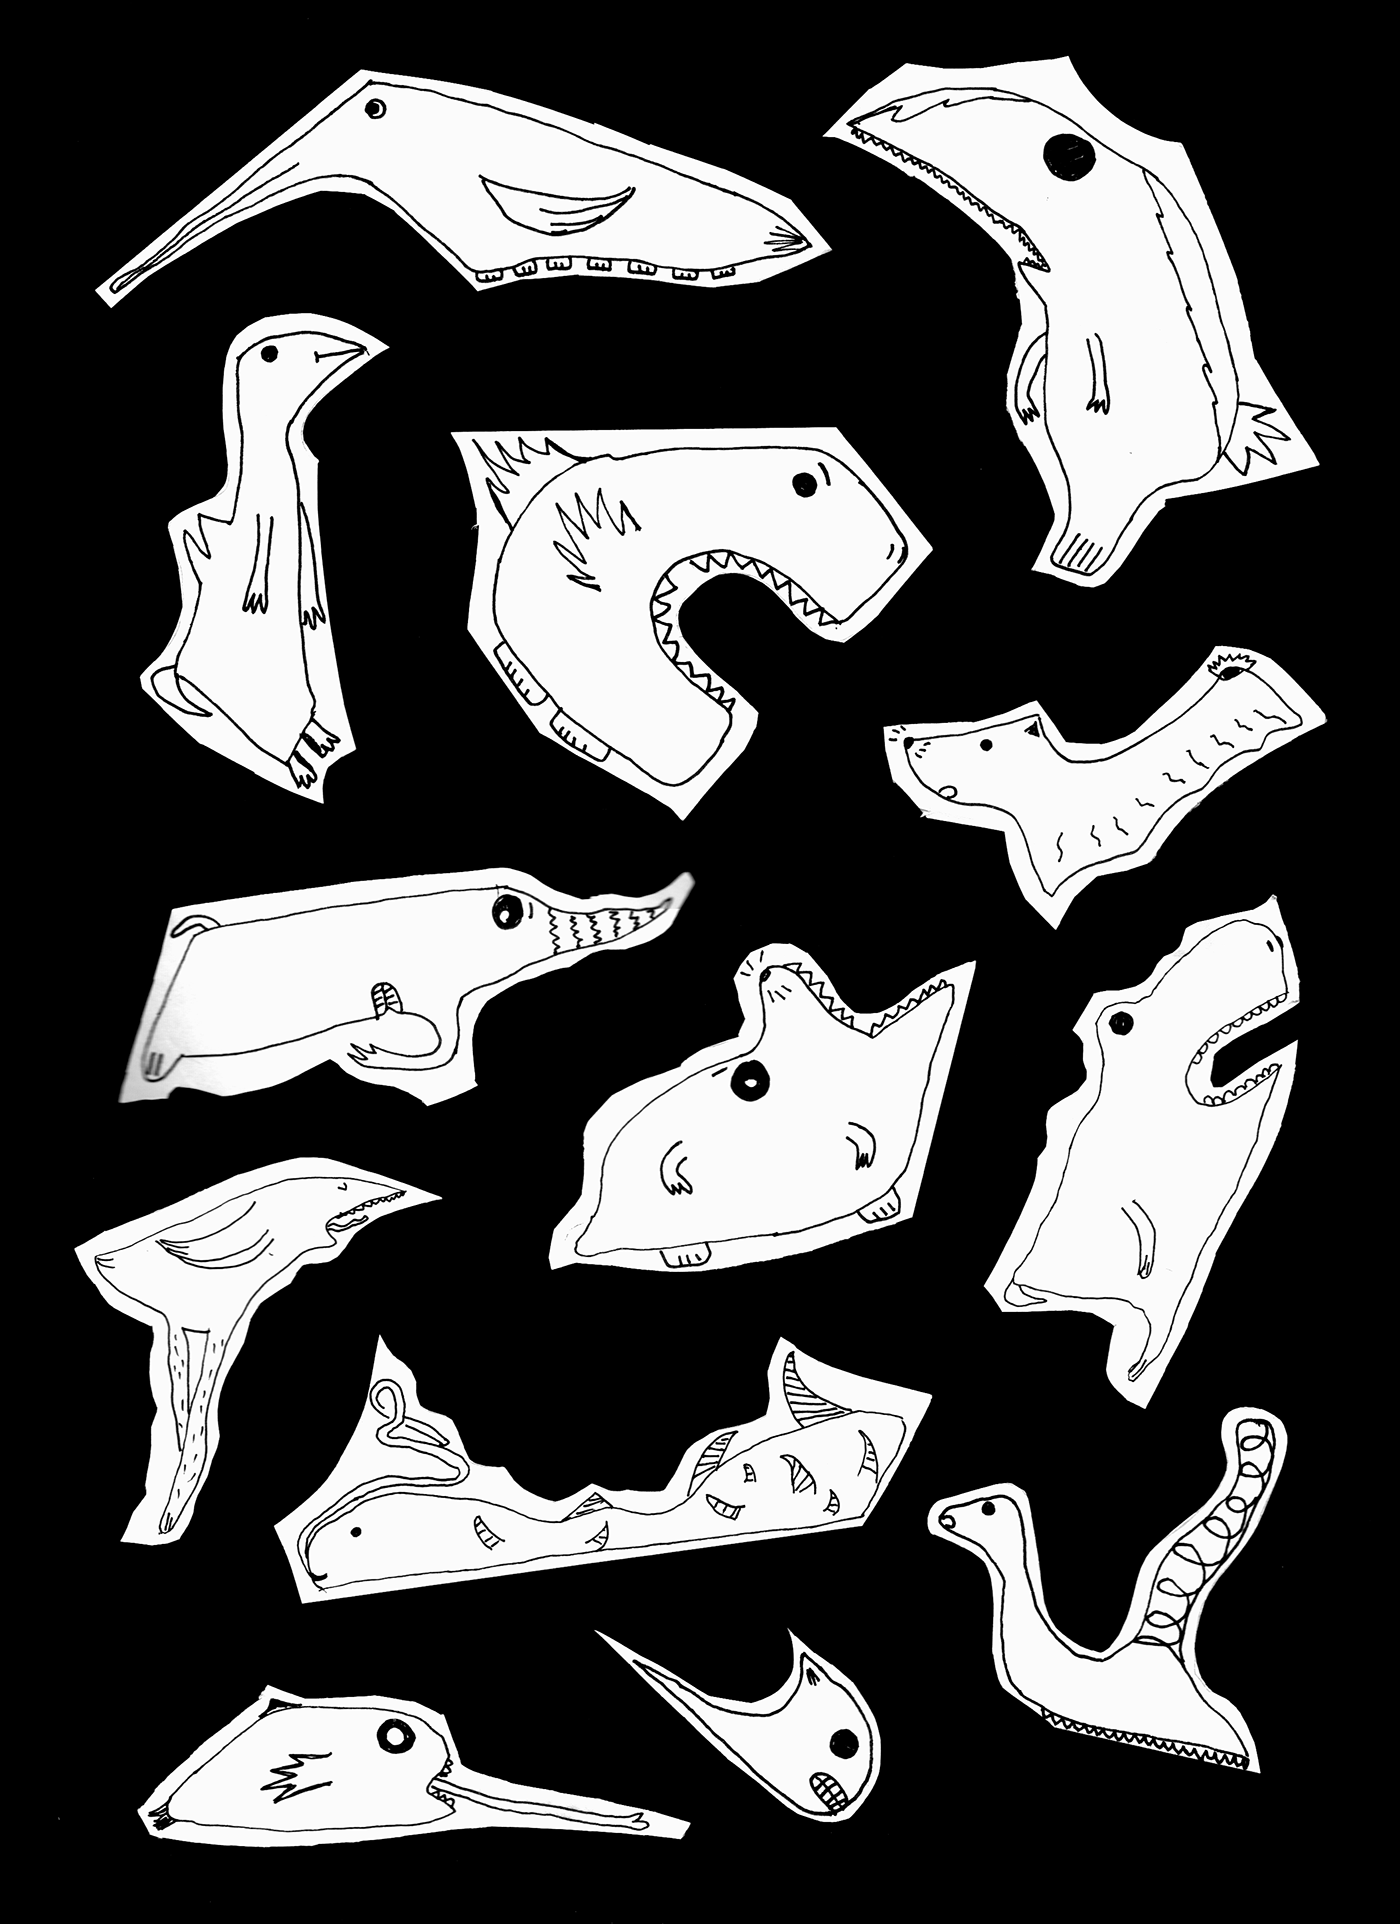 stickers dude black and white abstract animals ILLUSTRATION 